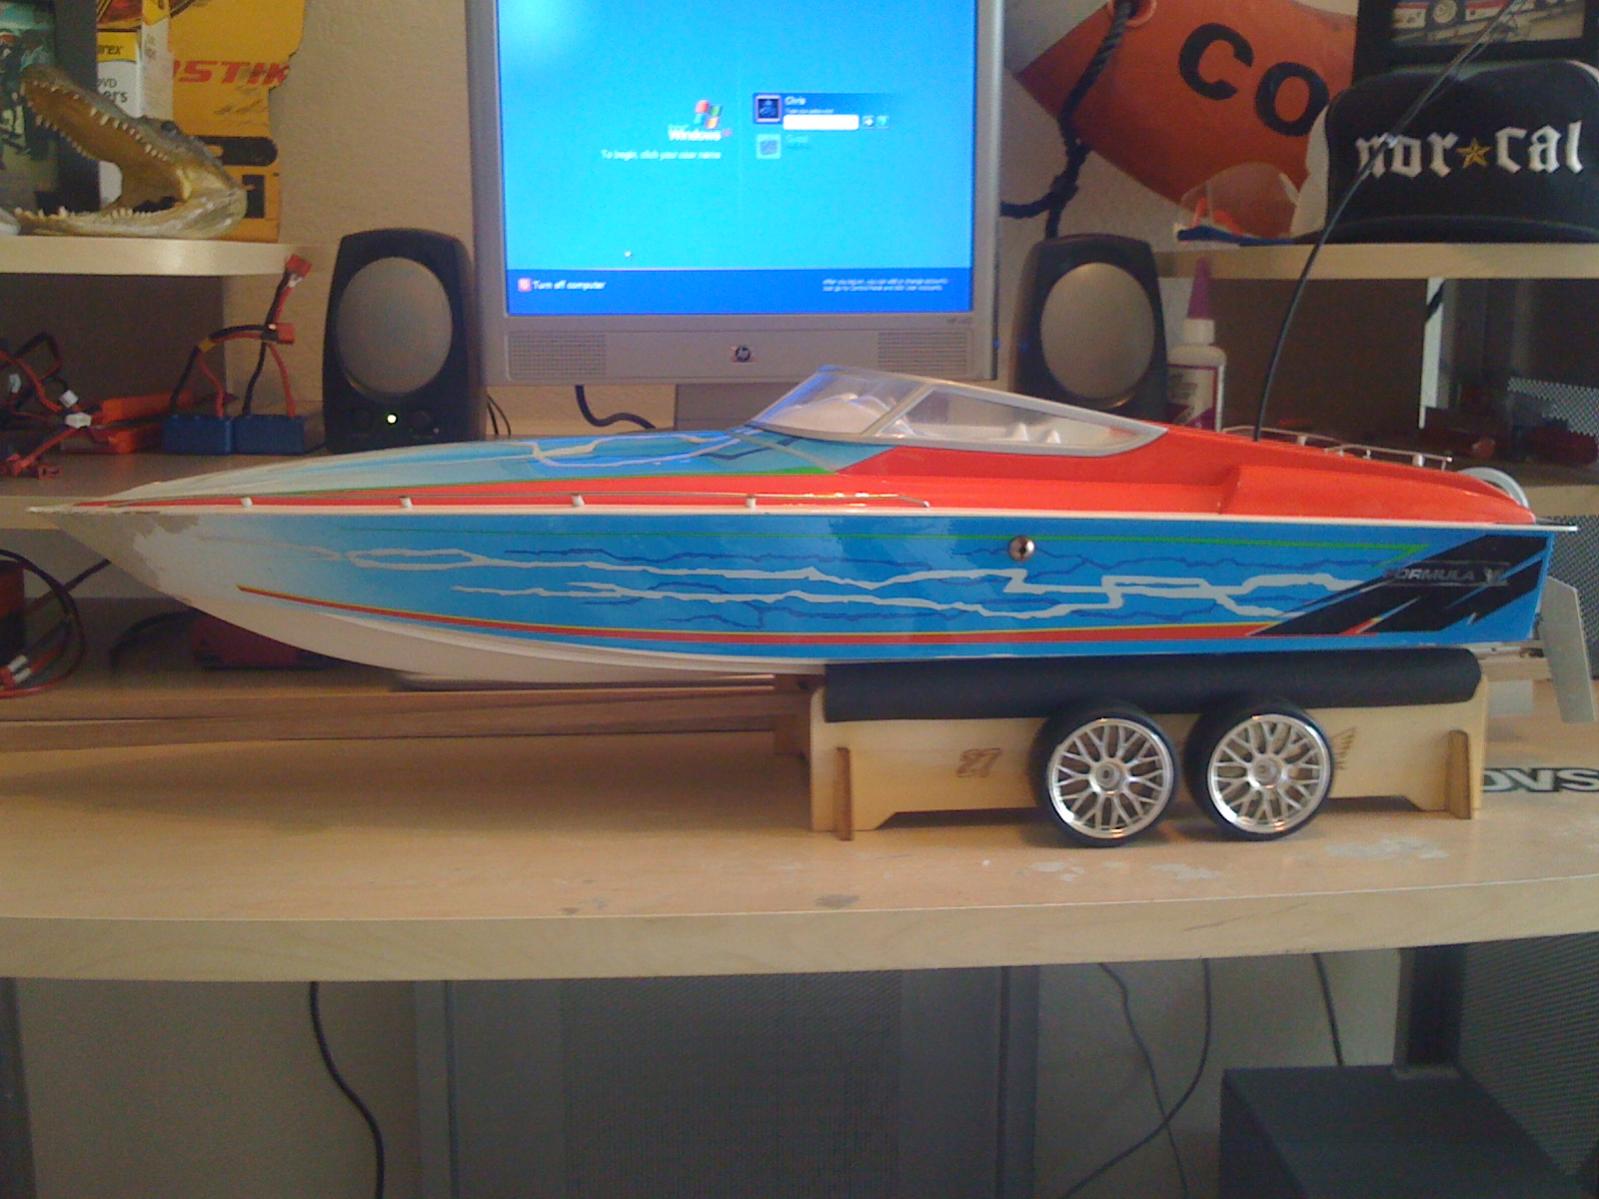 Woodworking rc boat build PDF Free Download